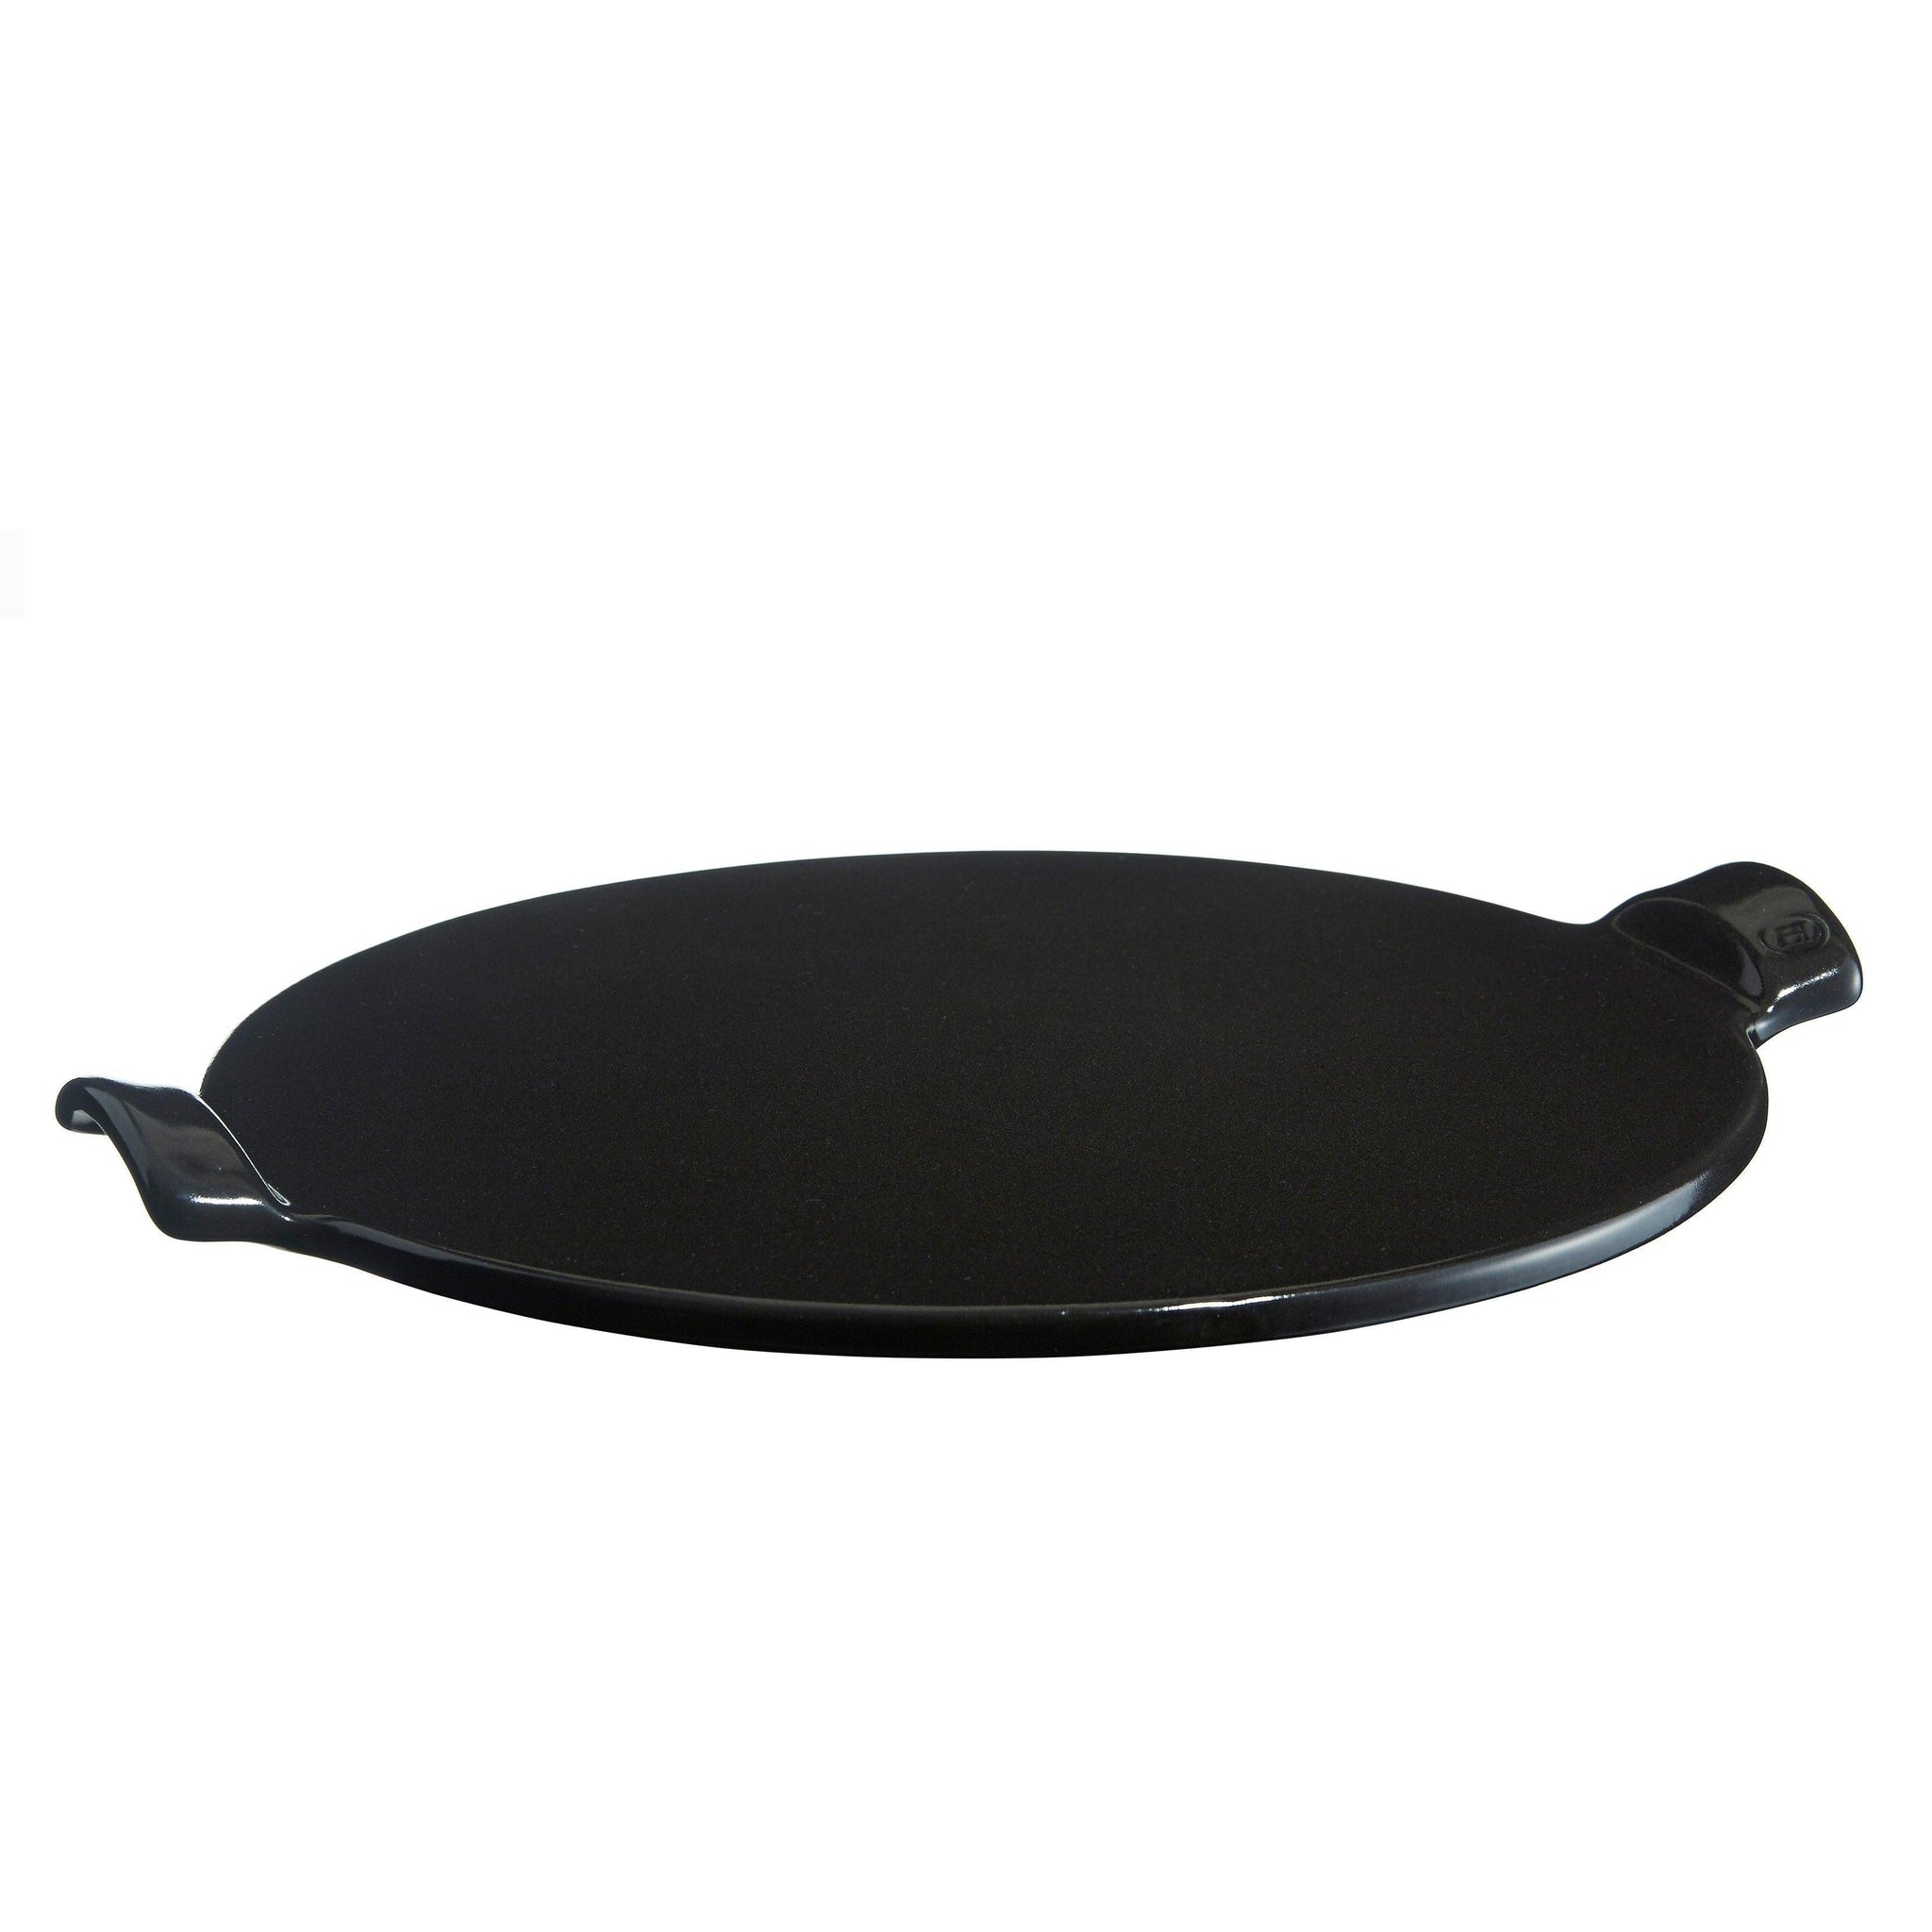 Emile Henry Smooth Pizza Stone Charcoal 37cm dia.